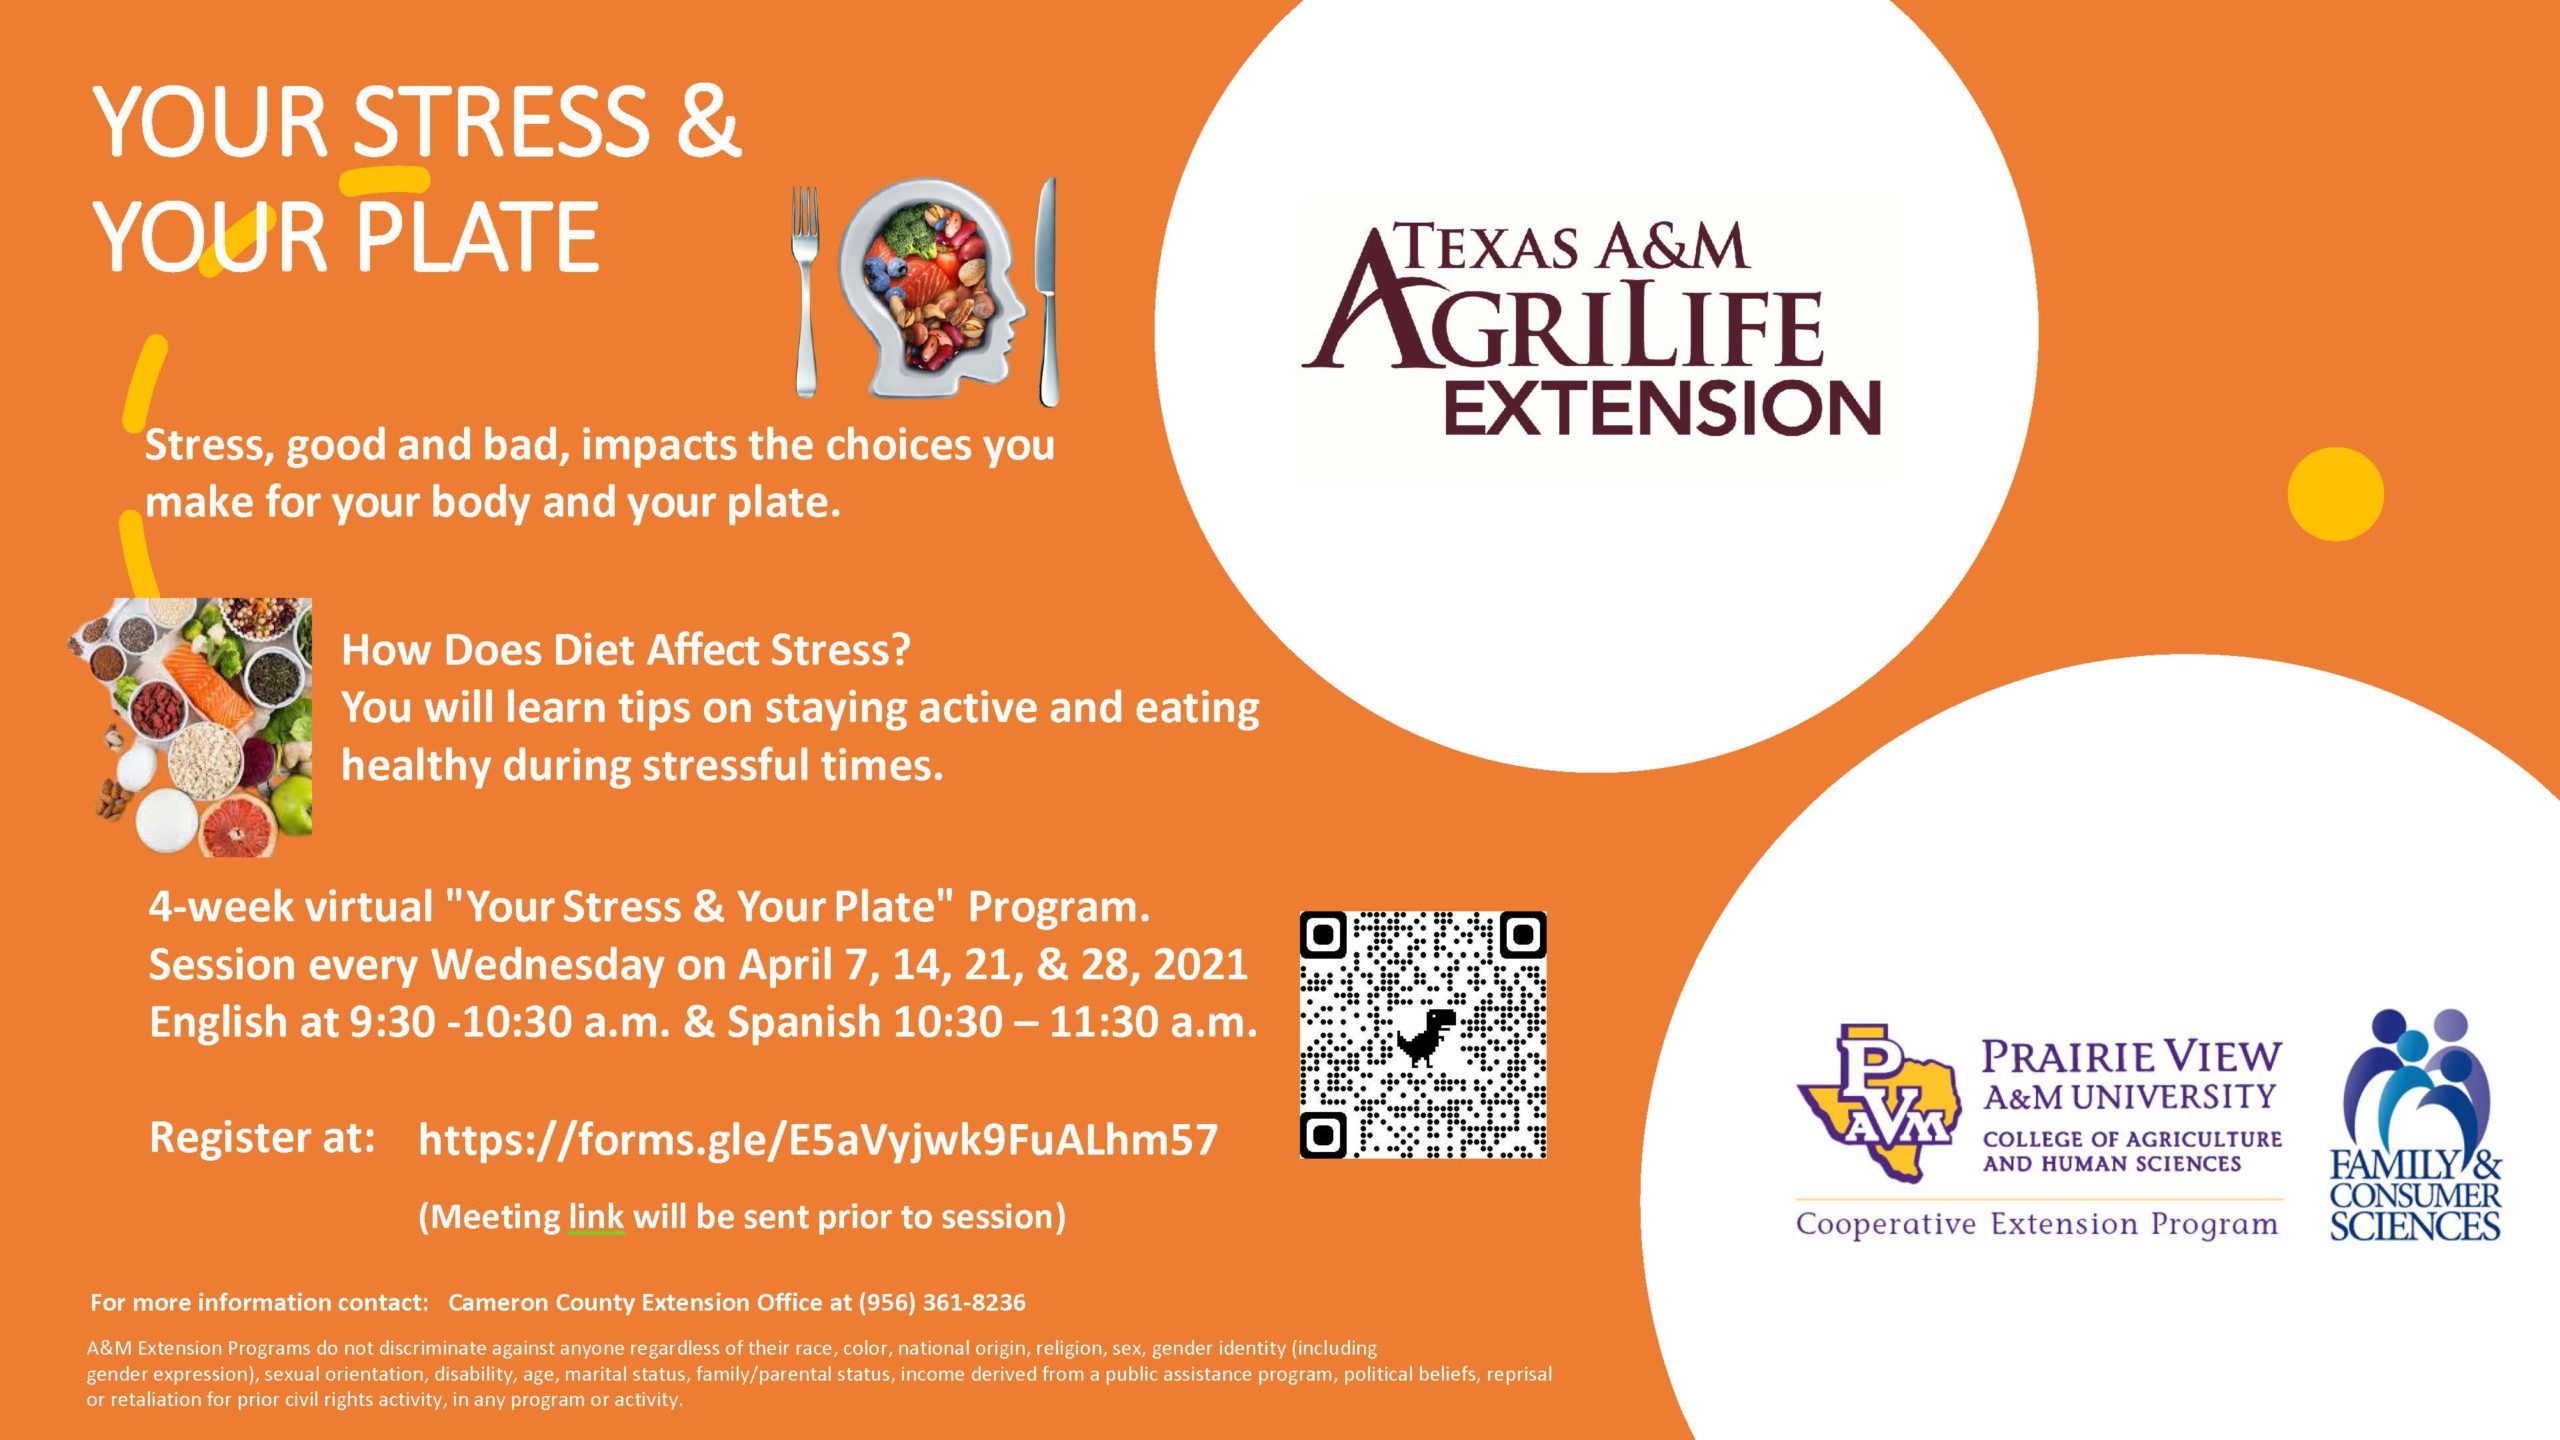 Driver & Passenger Safety – Texas A&M Agrilife Extension Service